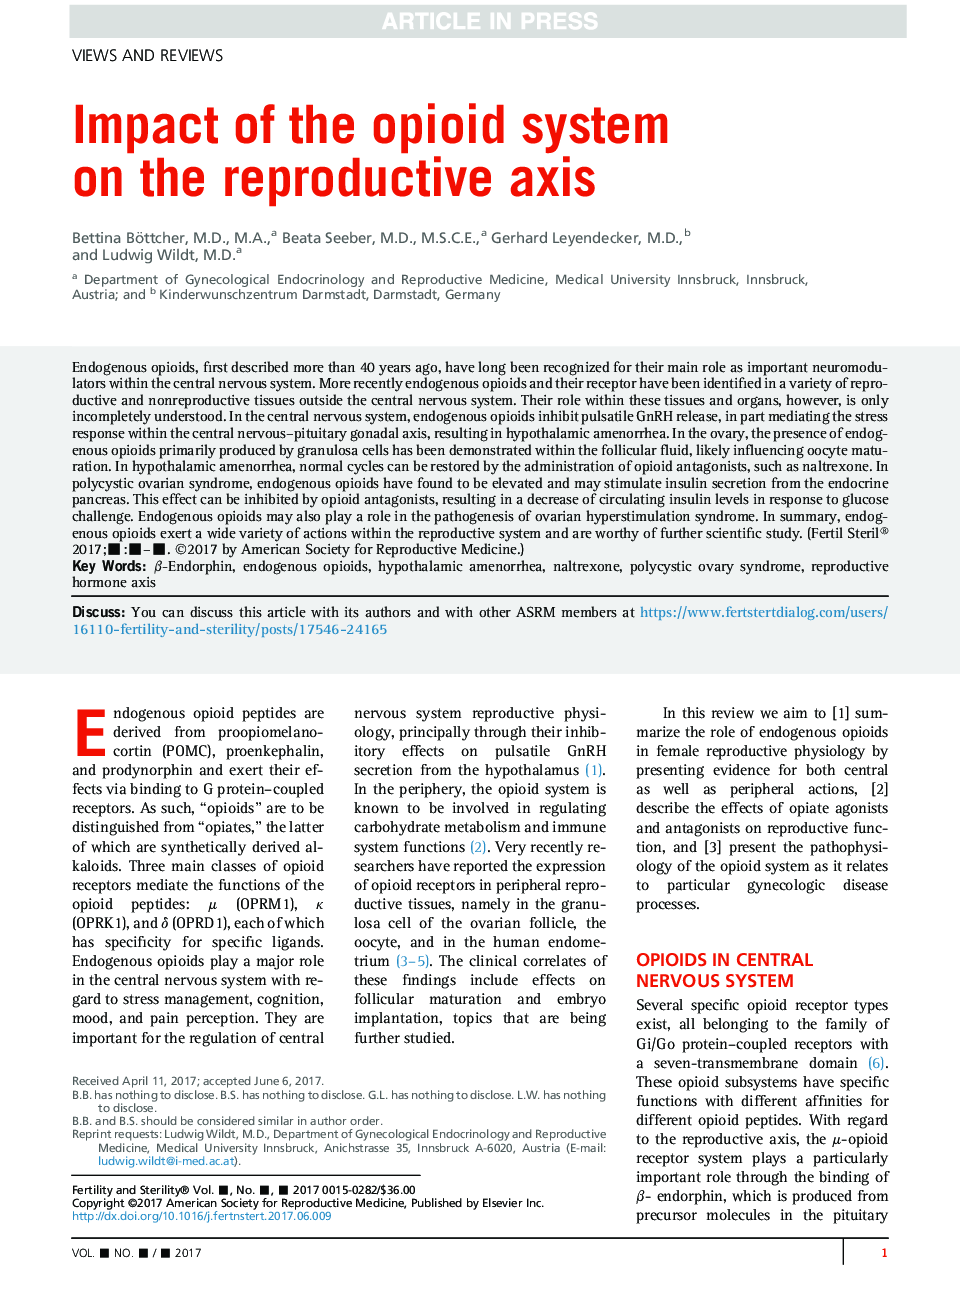 Impact of the opioid system onÂ theÂ reproductive axis